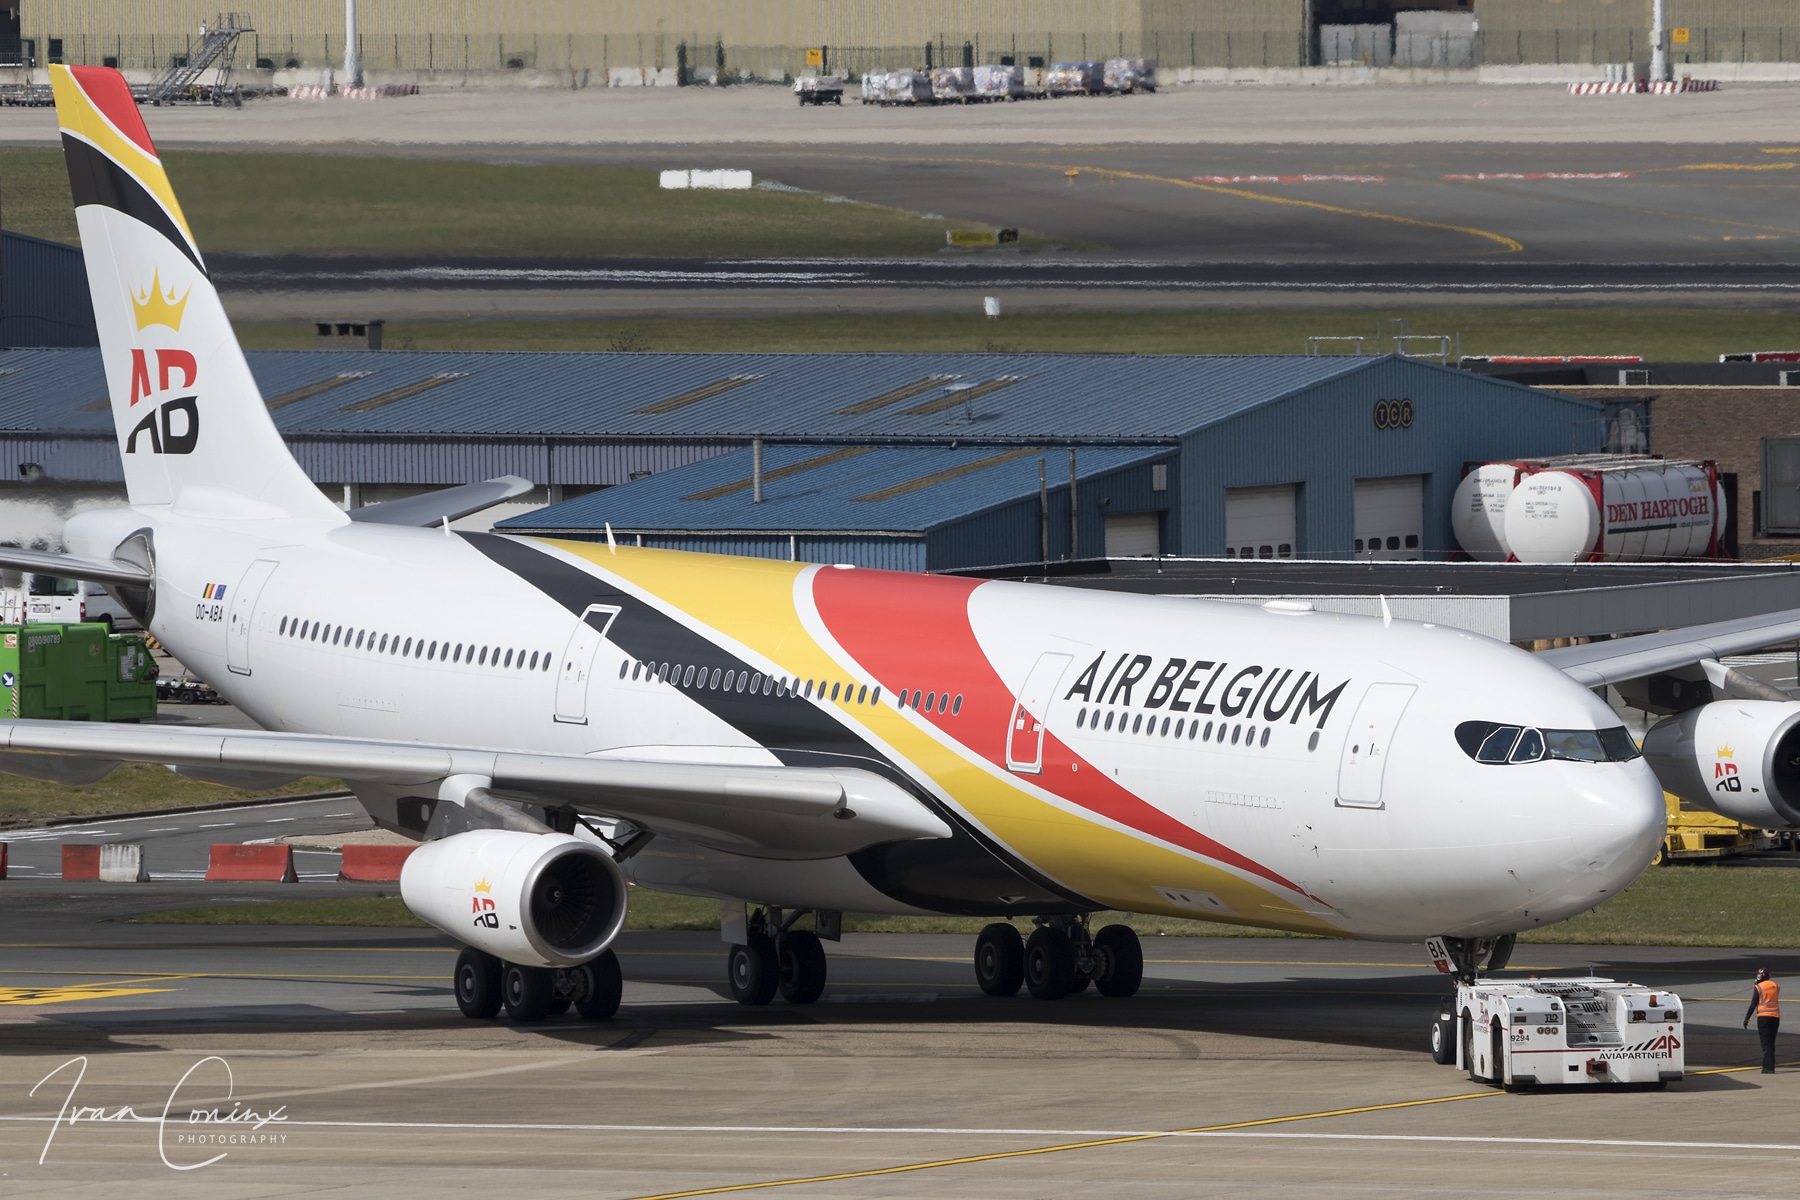 British Airways continues to rely on Air Belgium; back to Cairo ...